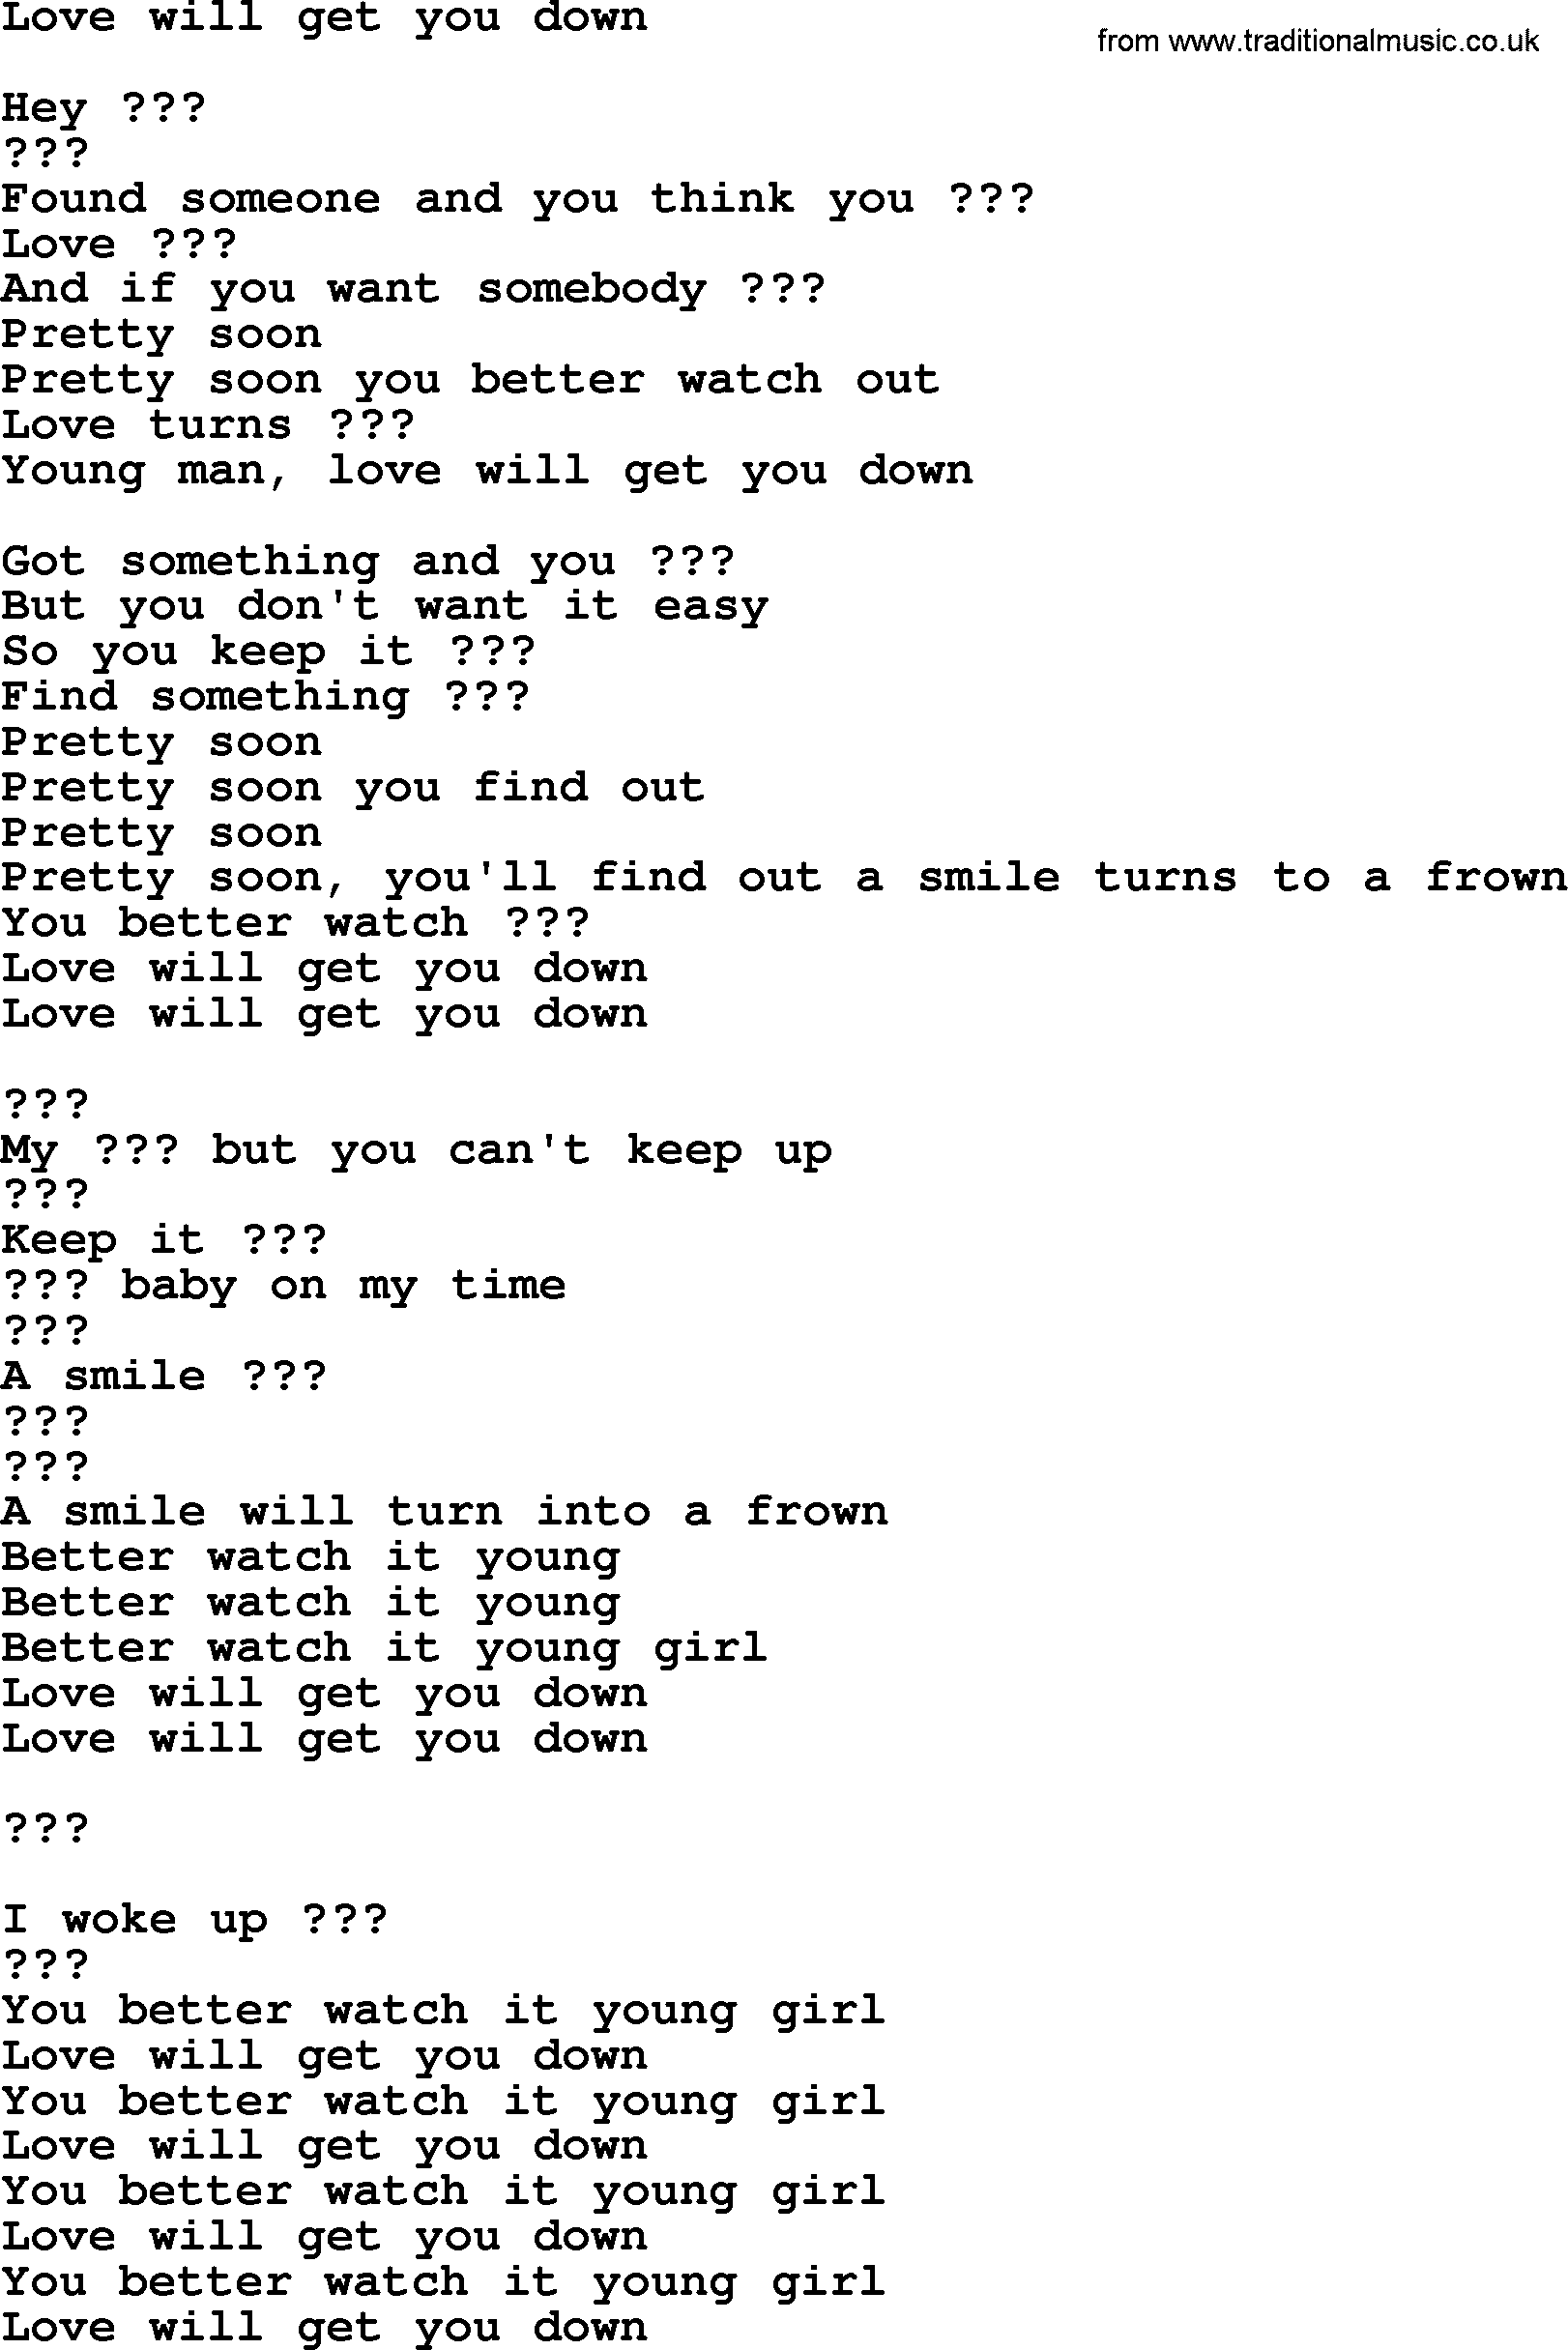 Bruce Springsteen song: Love Will Get You Down lyrics